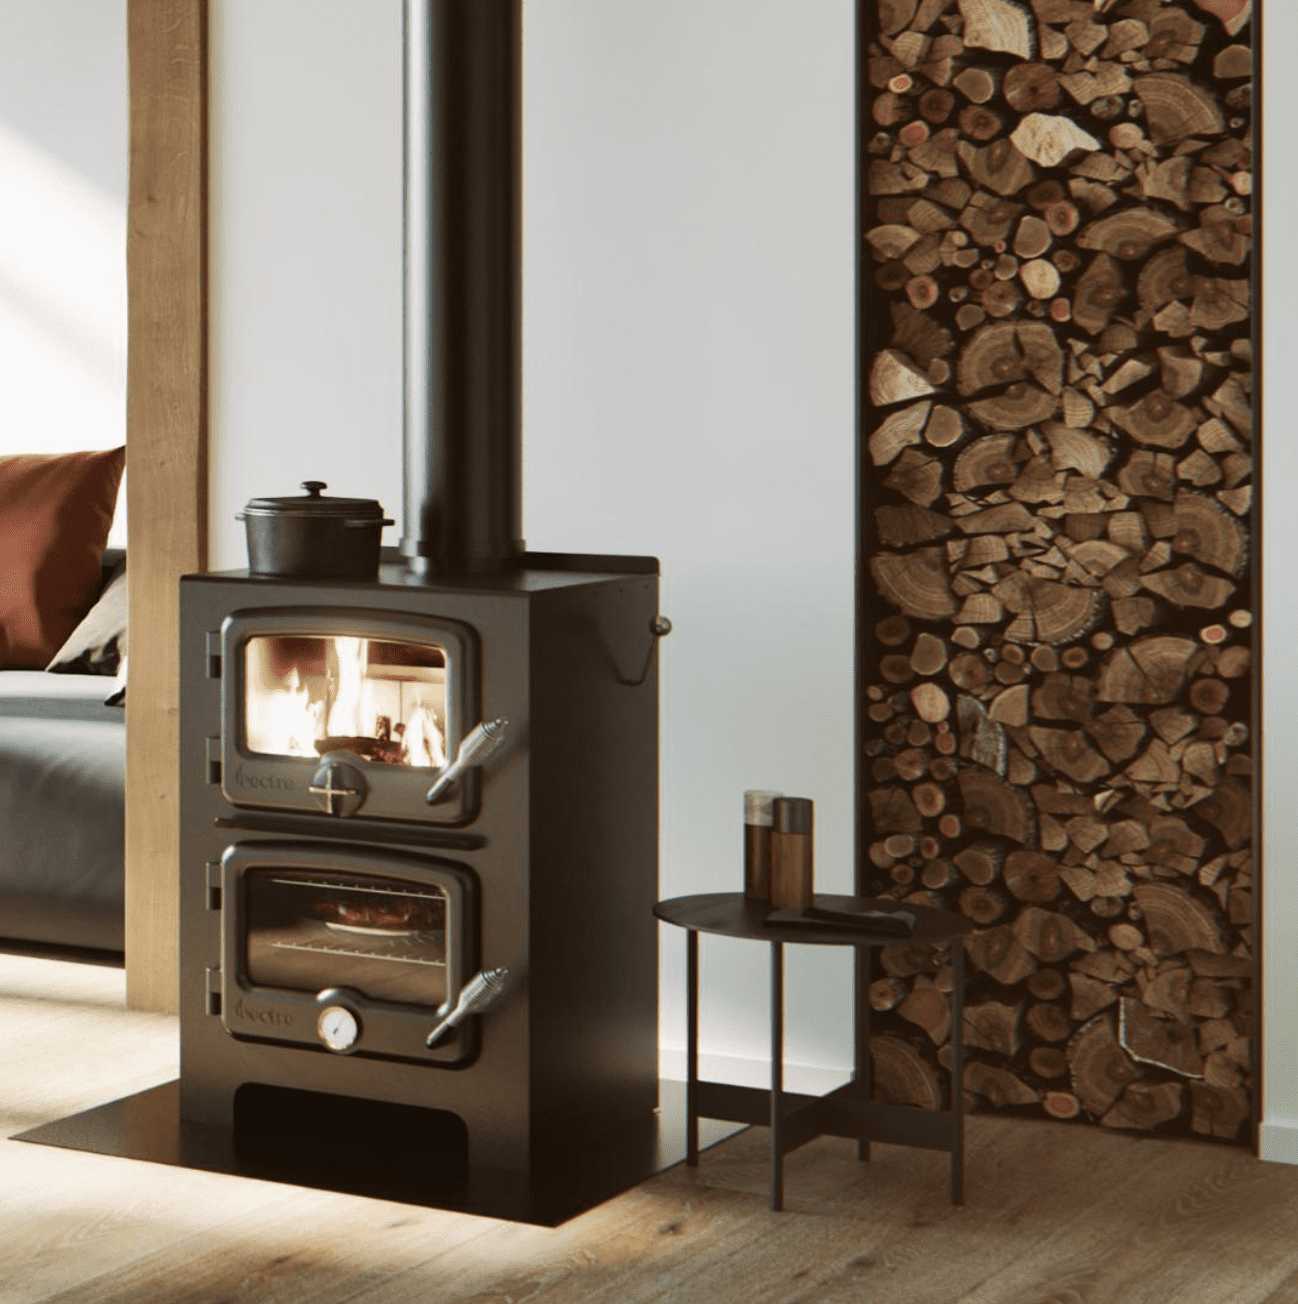 nectre 350 wood stove with oven